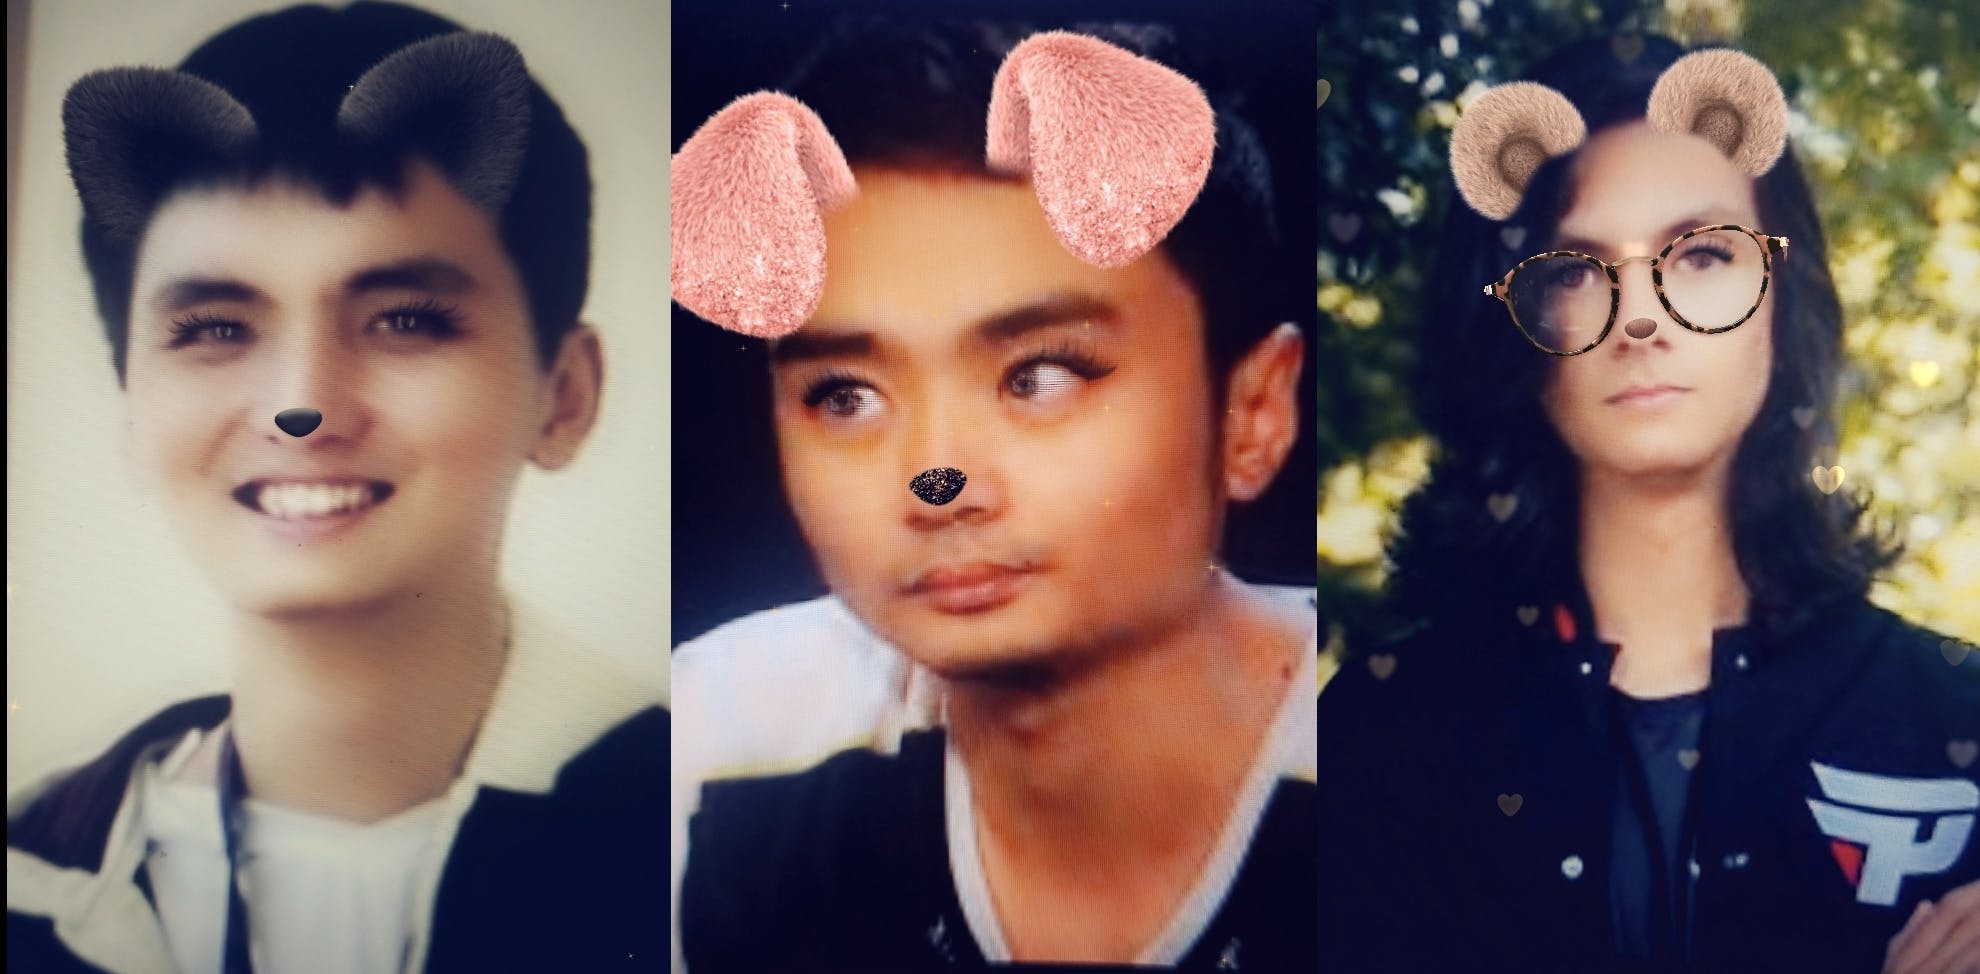 Iceiceice, xiao8, and duster snapchat